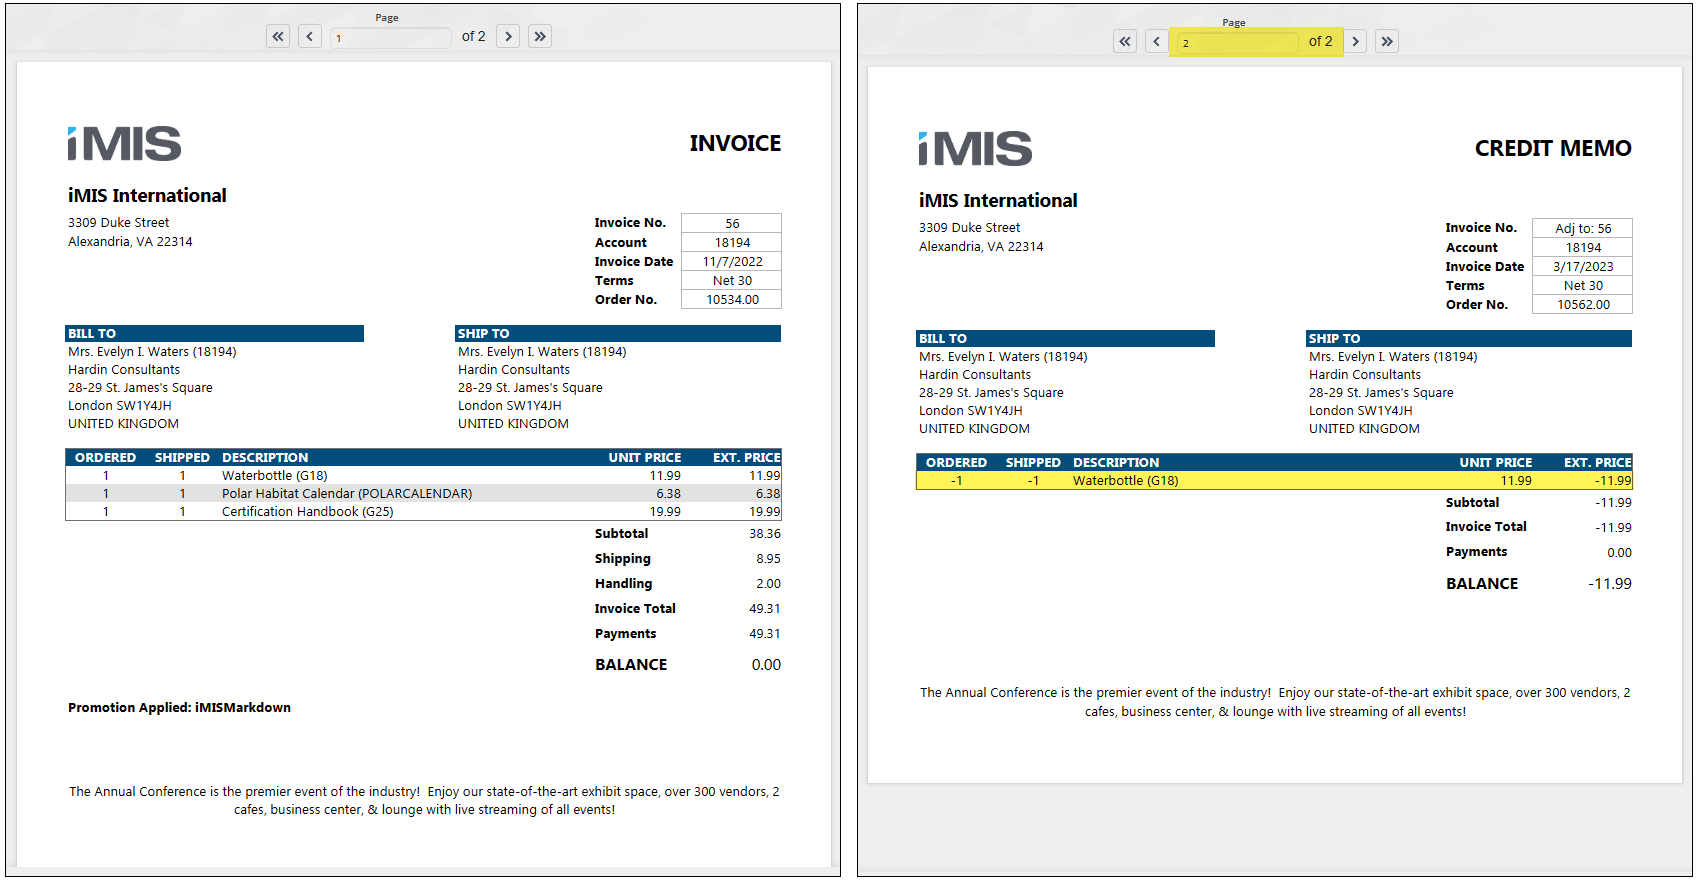 Example of the original invoice and the new credit memo invoice